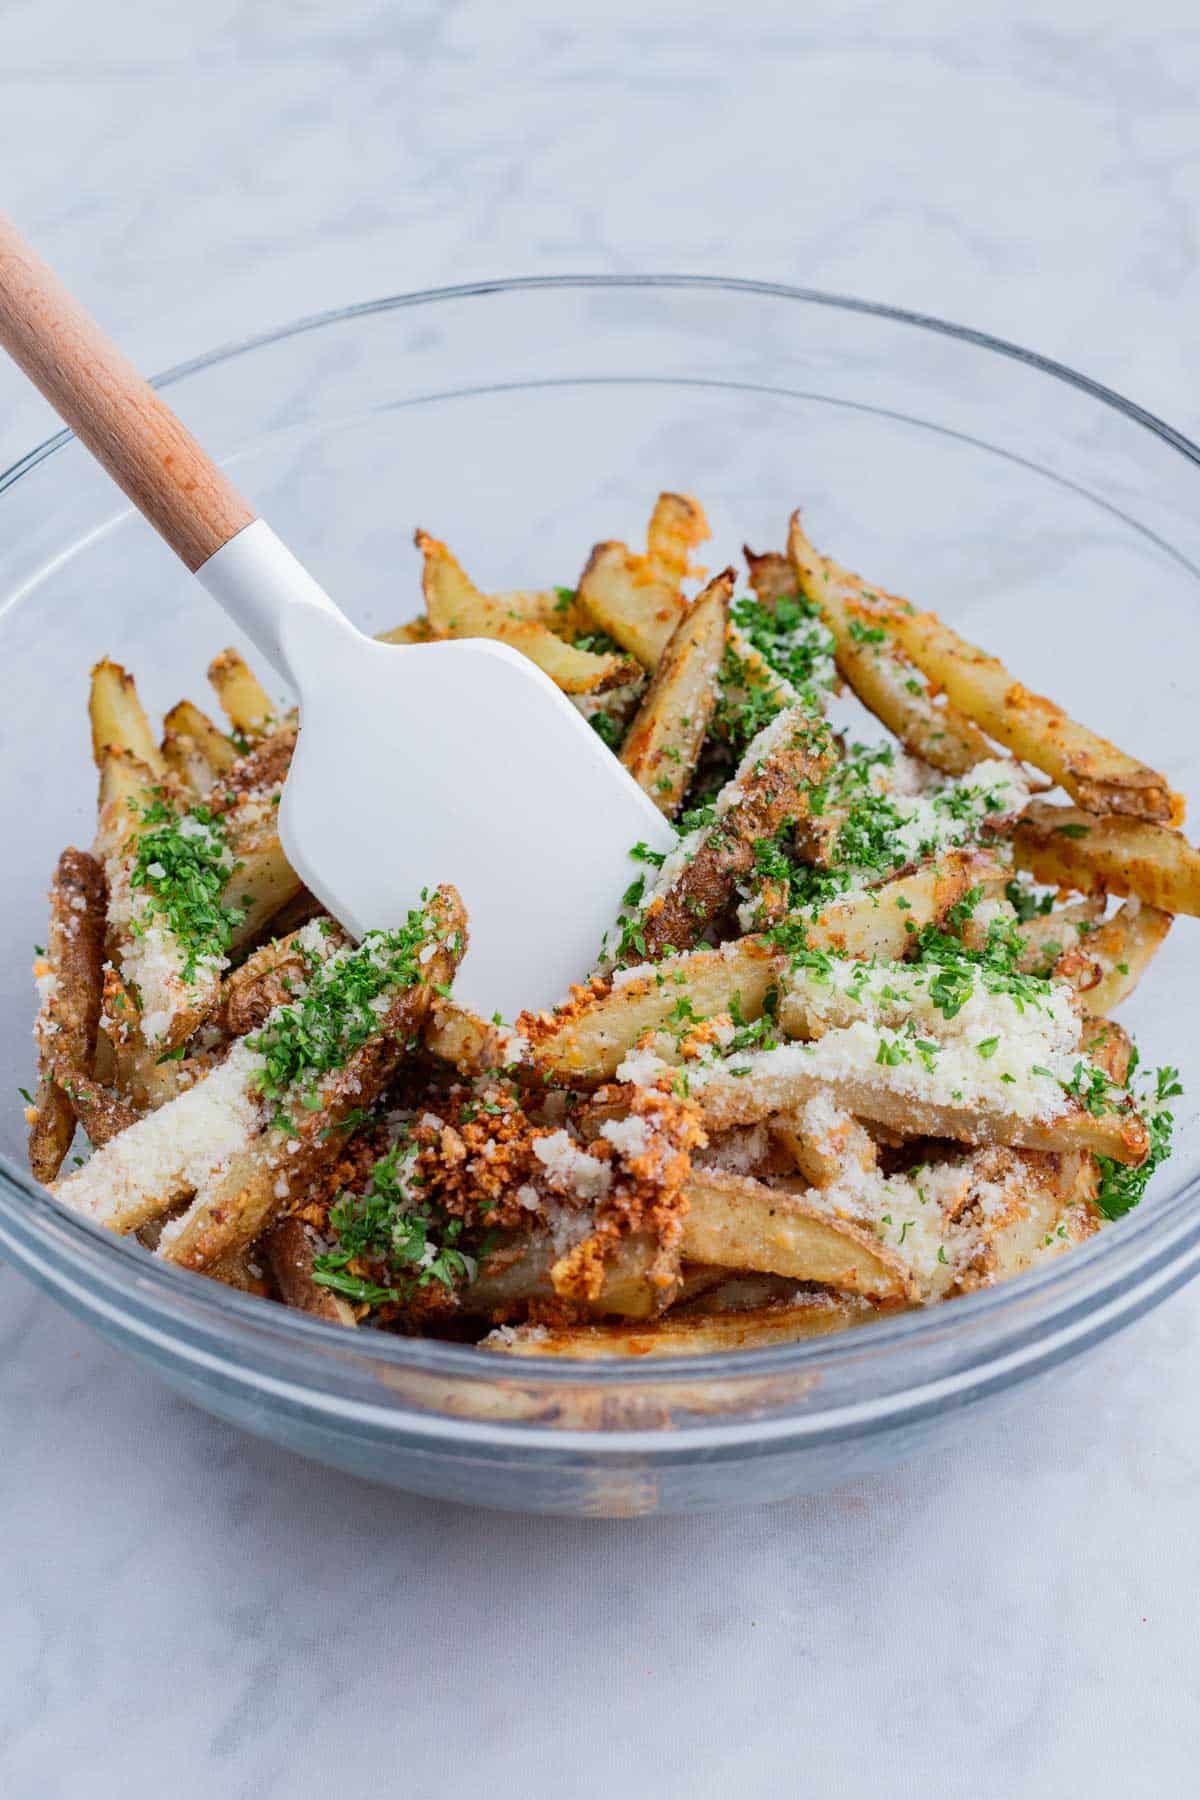 Parsley, Parmesan cheese, and seasonings are added to the baked fries.